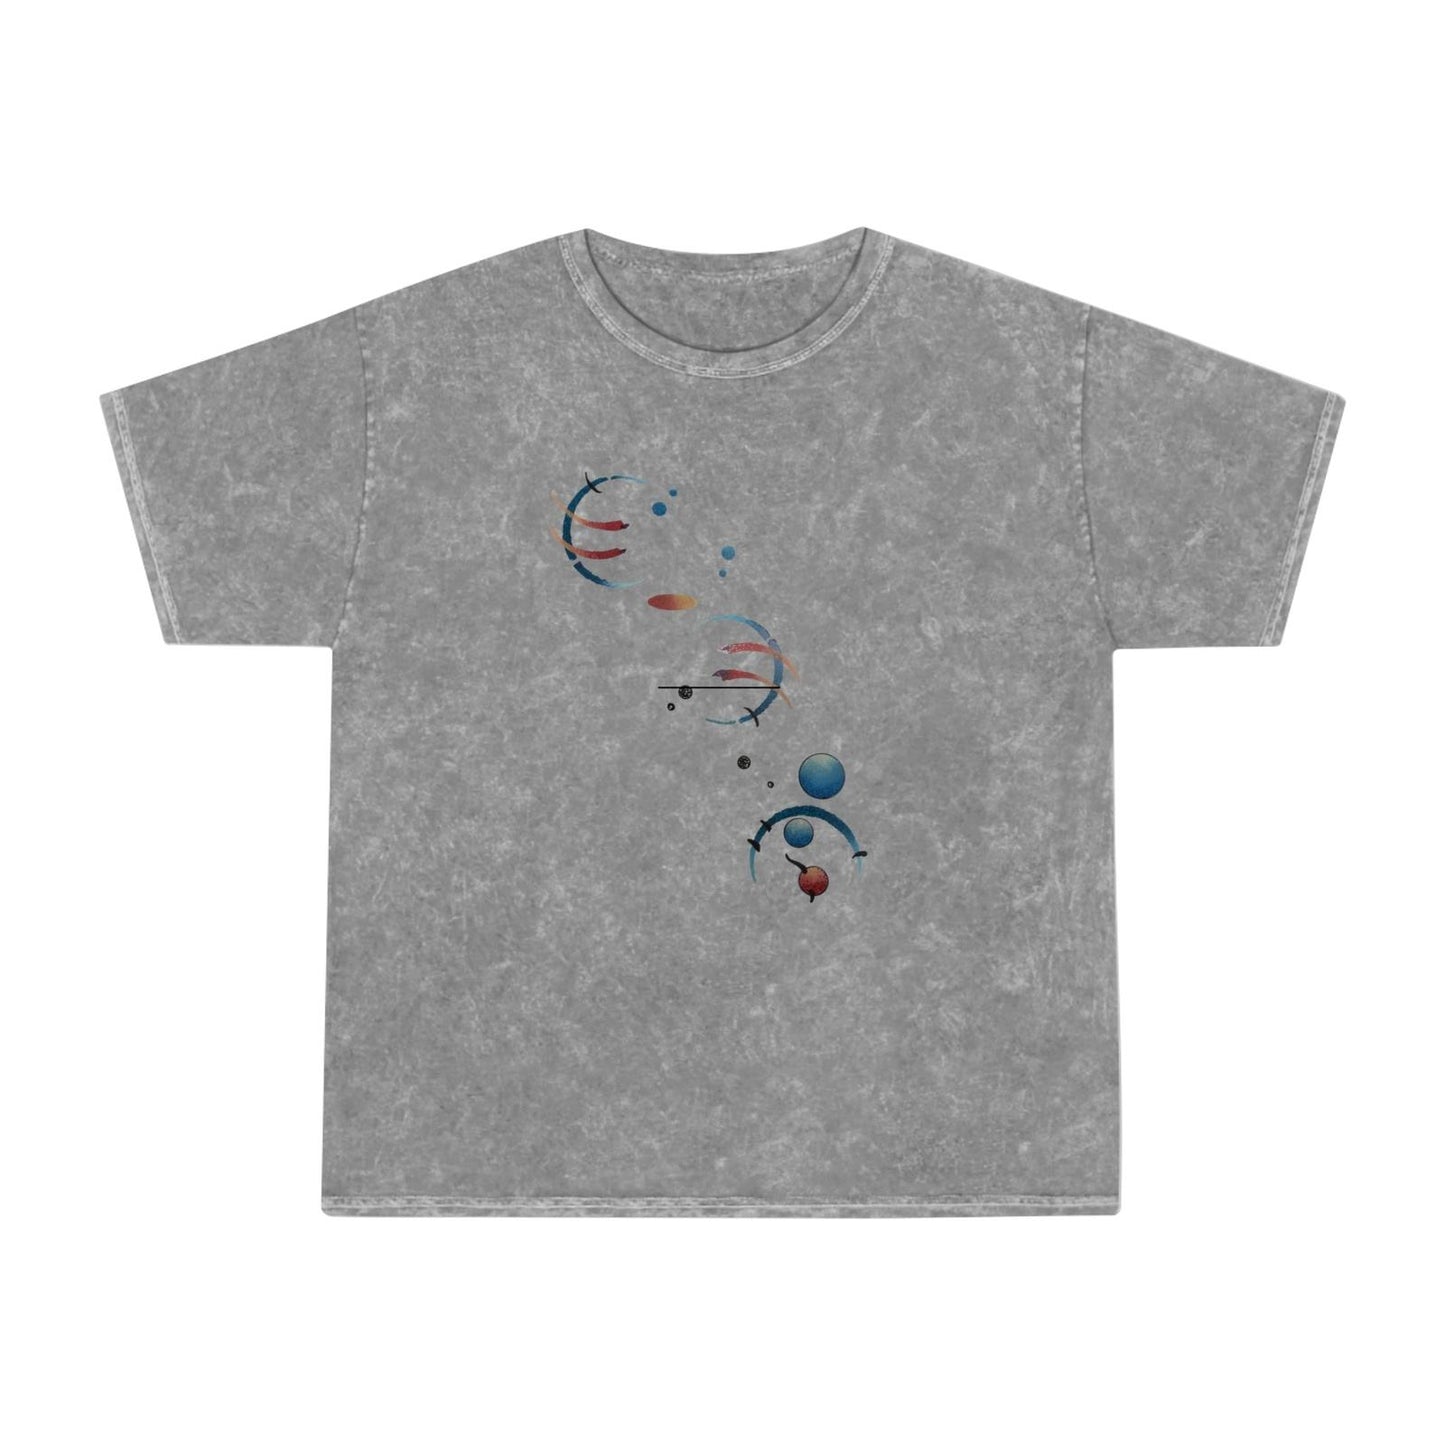 Unisex Mineral Wash T-Shirt tailwinds